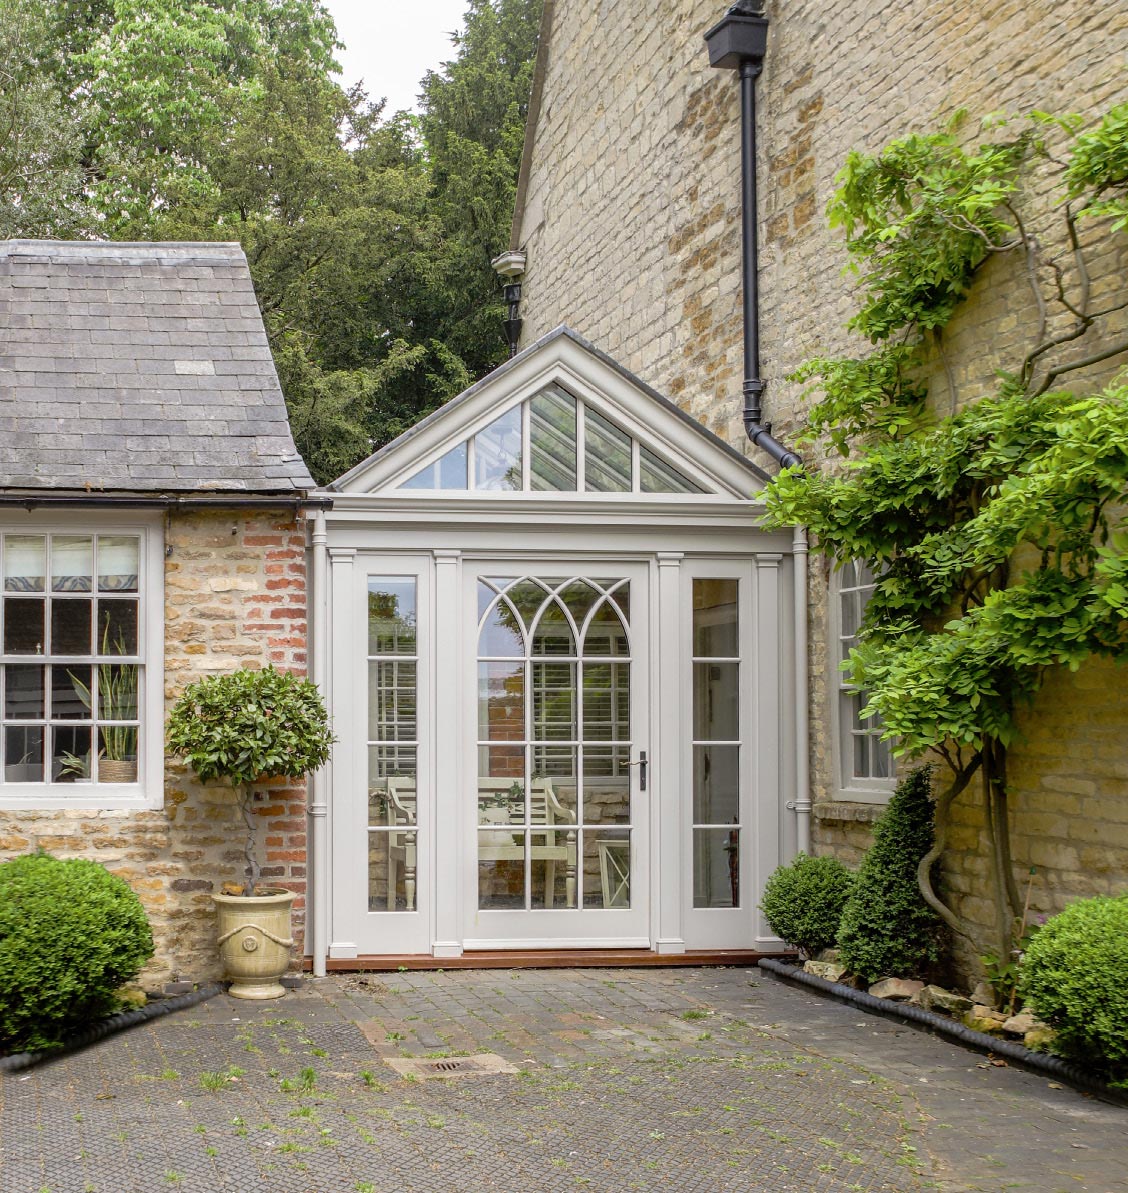 Example of a small conservatory used as an entrance hall